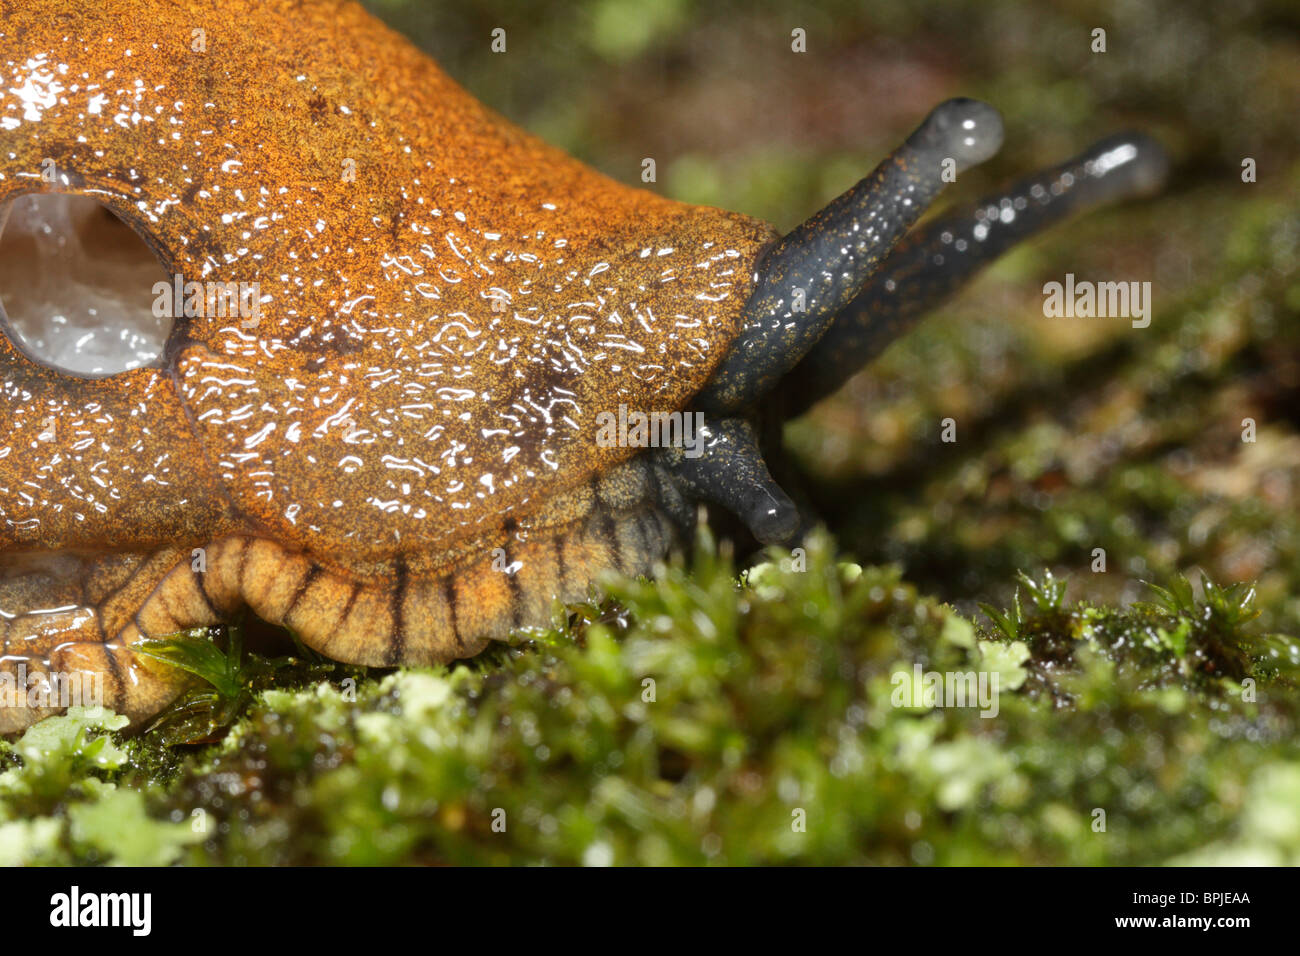 Arion vulgaris or Arion lusitanicus, the Spanish slug. The breathing hole is easy to see. Stock Photo